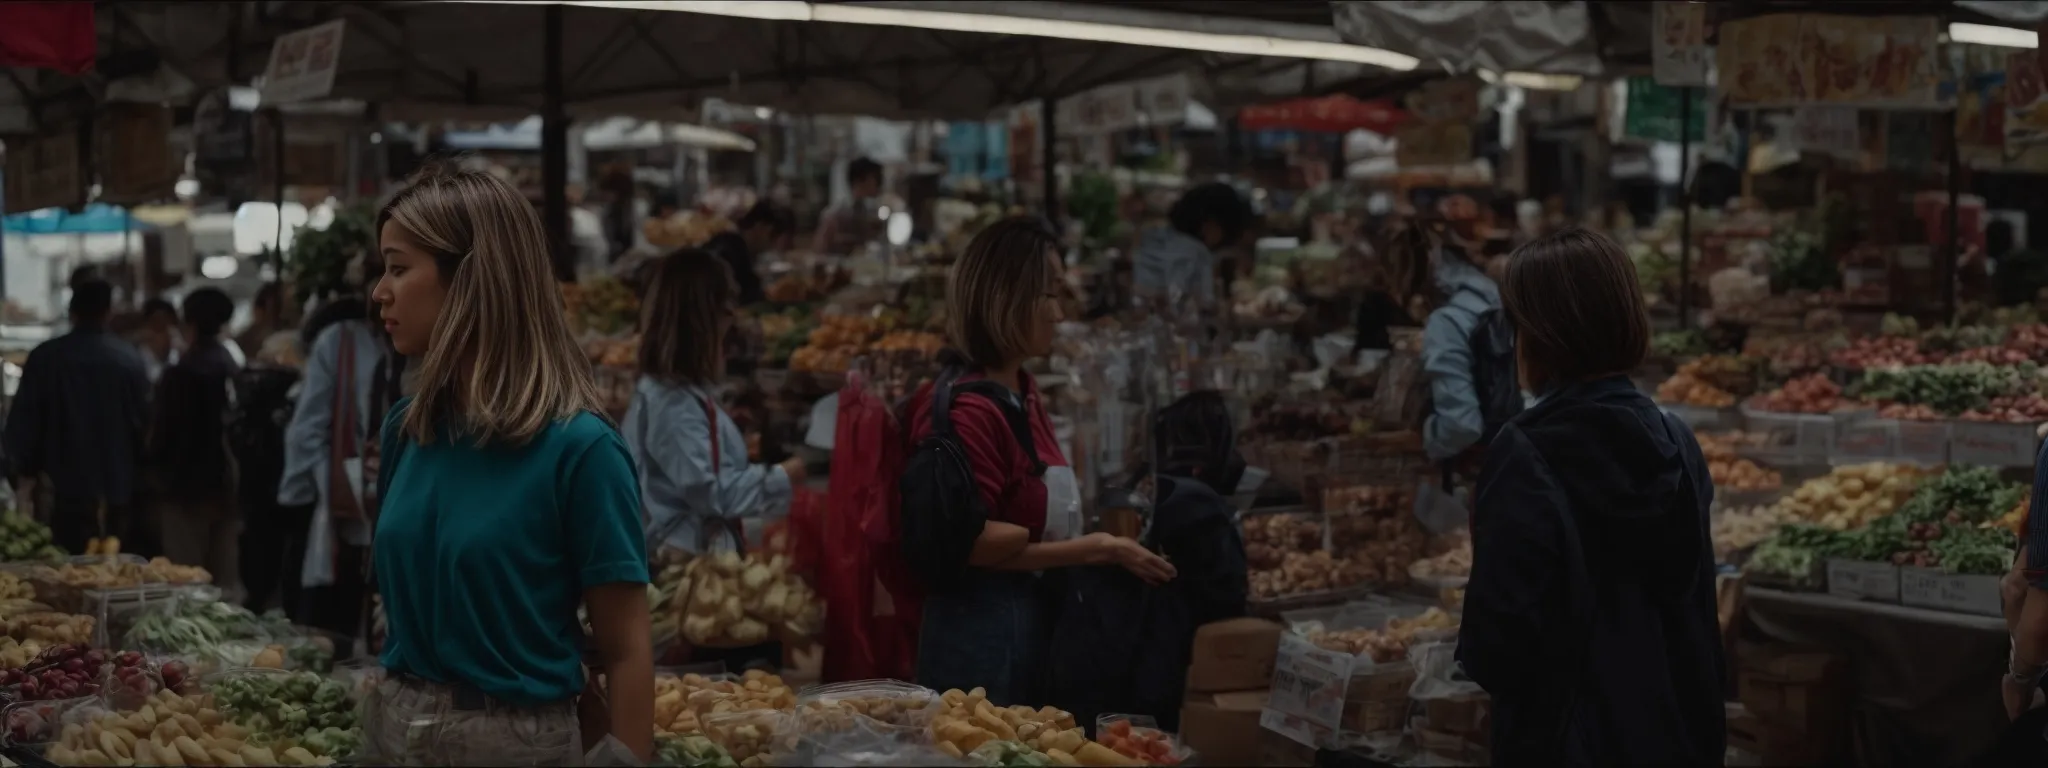 a group of people engaging in a friendly customer service interaction with a market in the background.